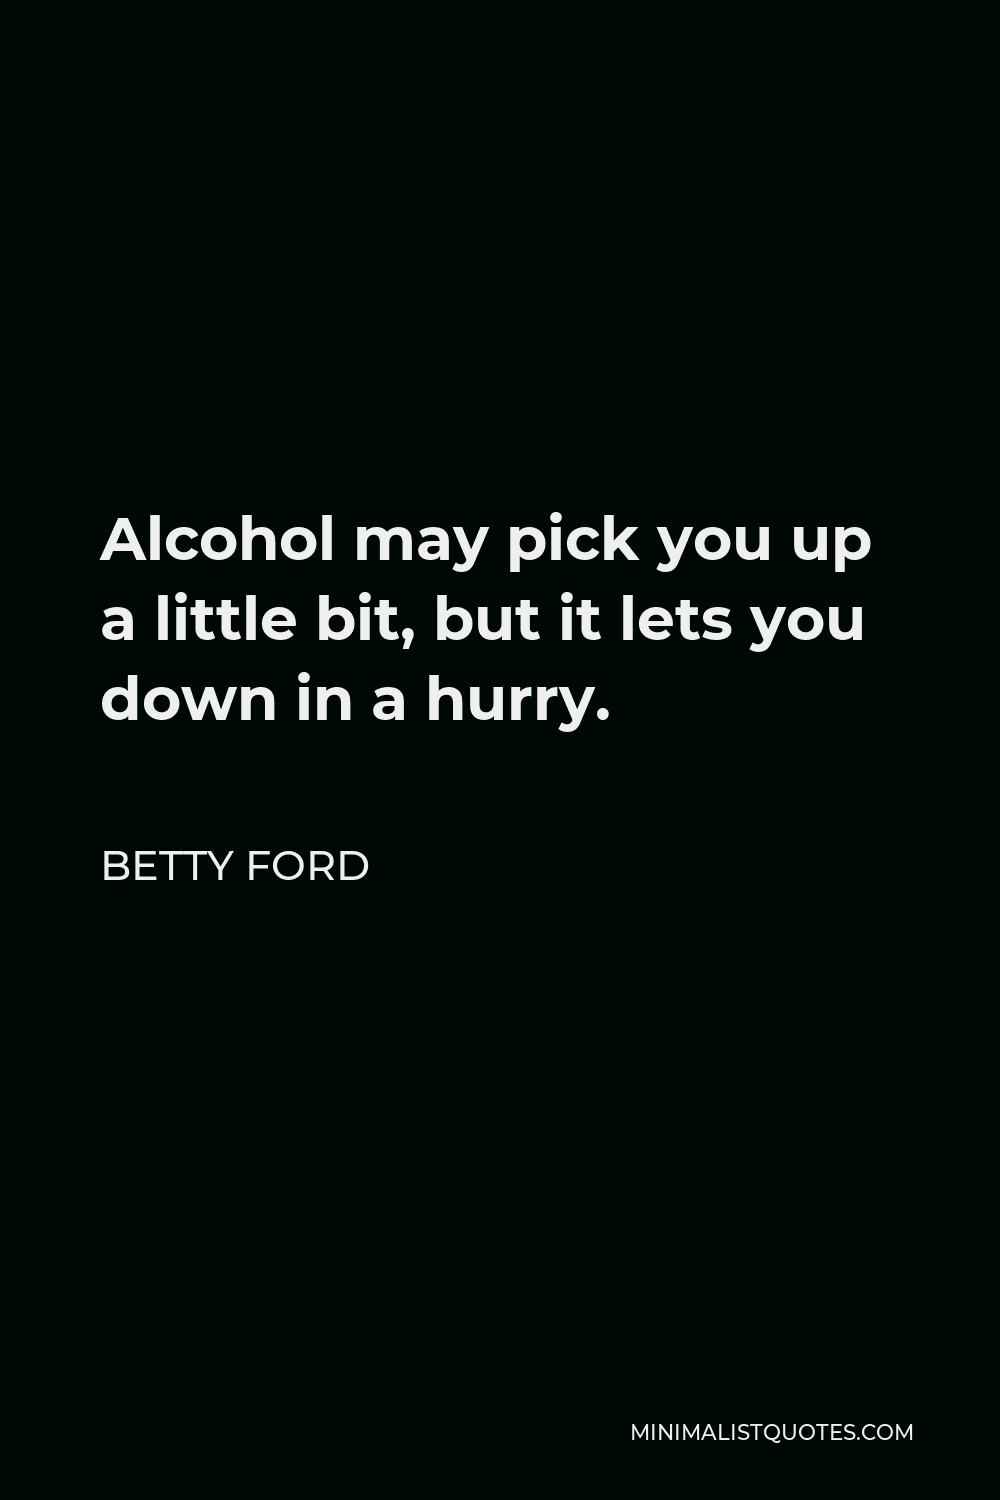 Betty Ford Quote - Alcohol may pick you up a little bit, but it lets you down in a hurry.